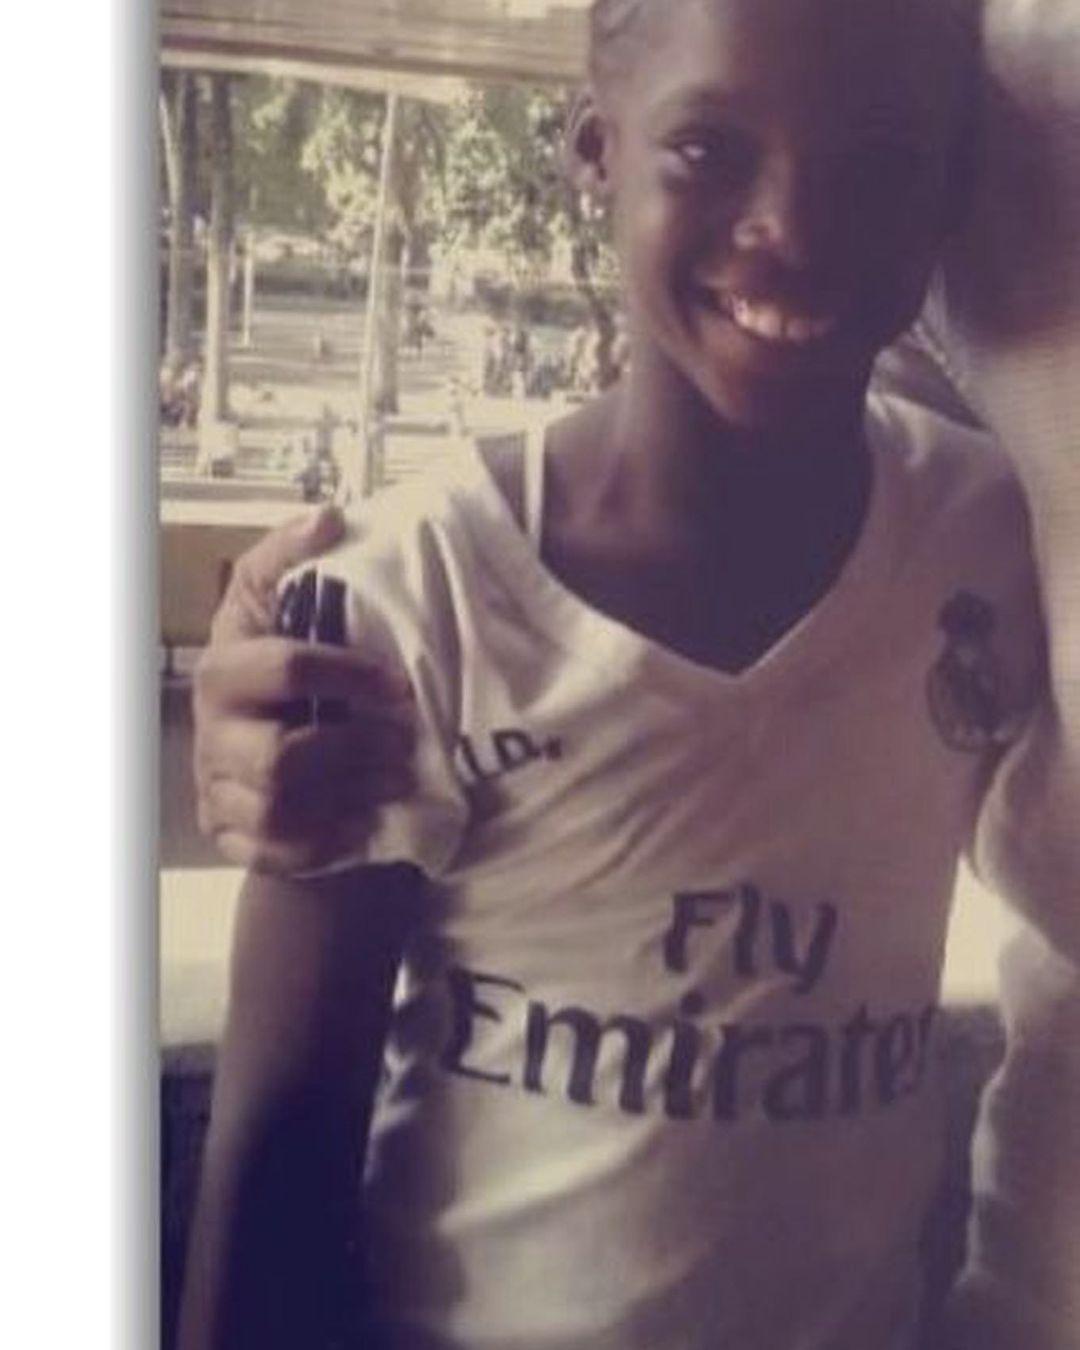 Linda Caicedo as the girl wearing a Real Madrid jersey.